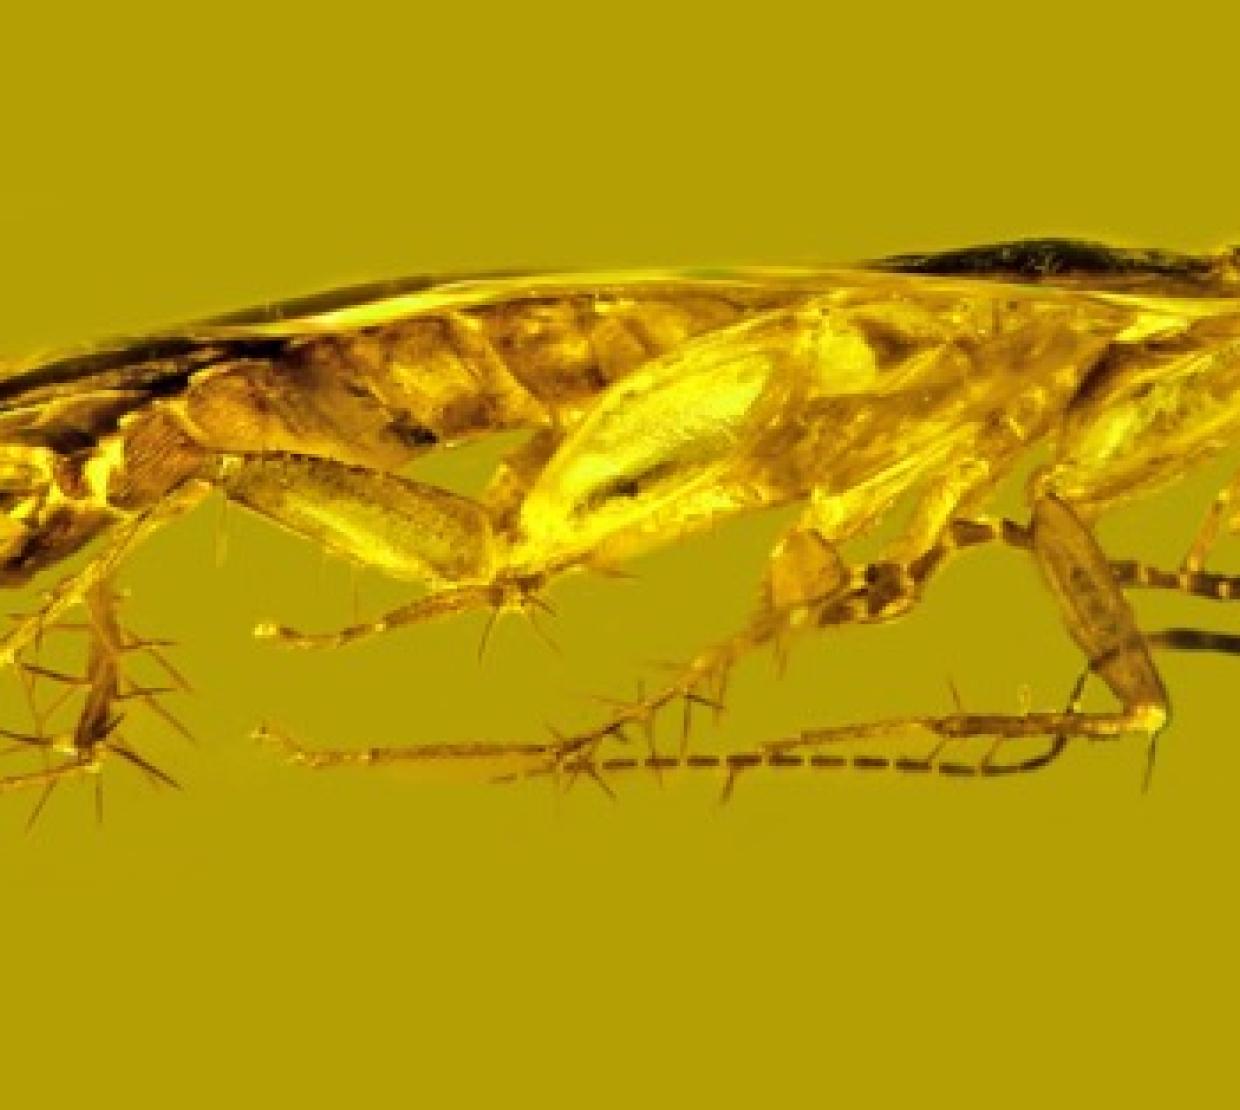 Side view of a cockroach specimen suspended in Dominican amber.